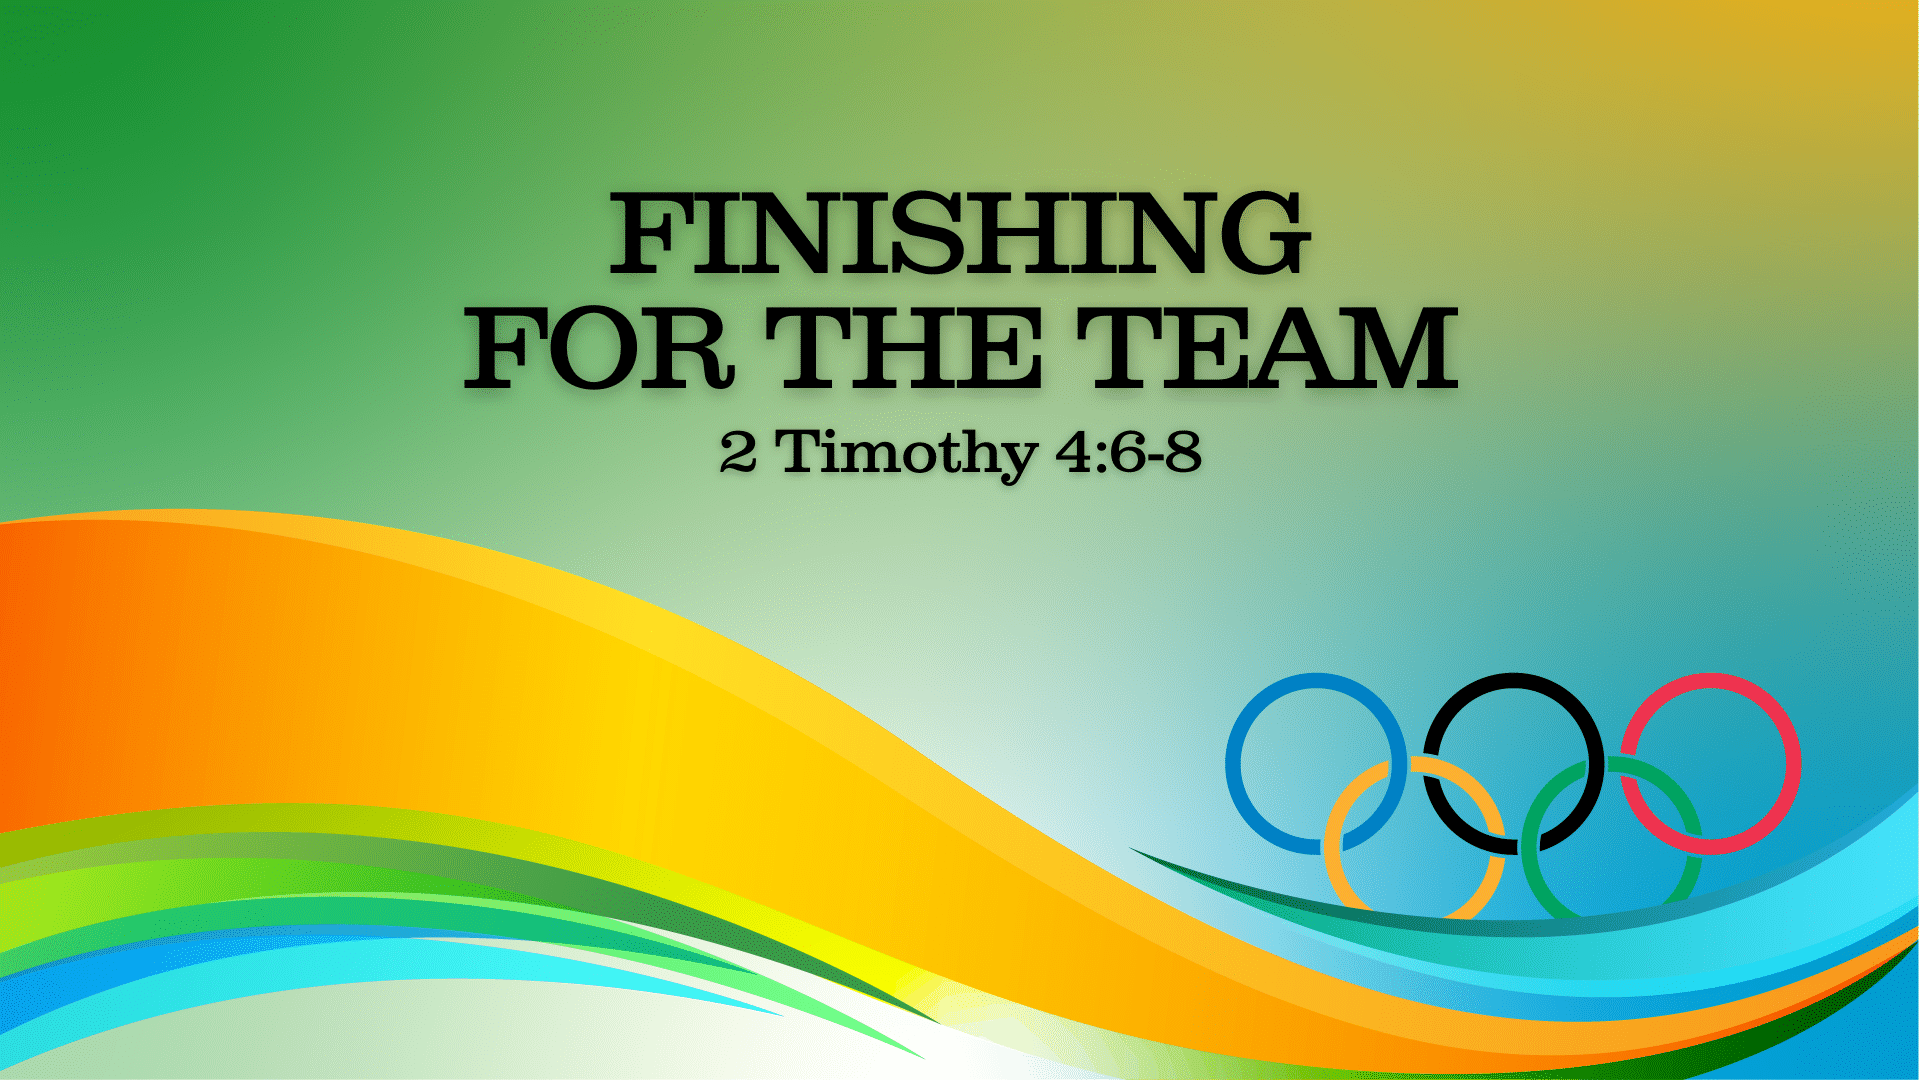 Go For The Gold: Finishing For The Team